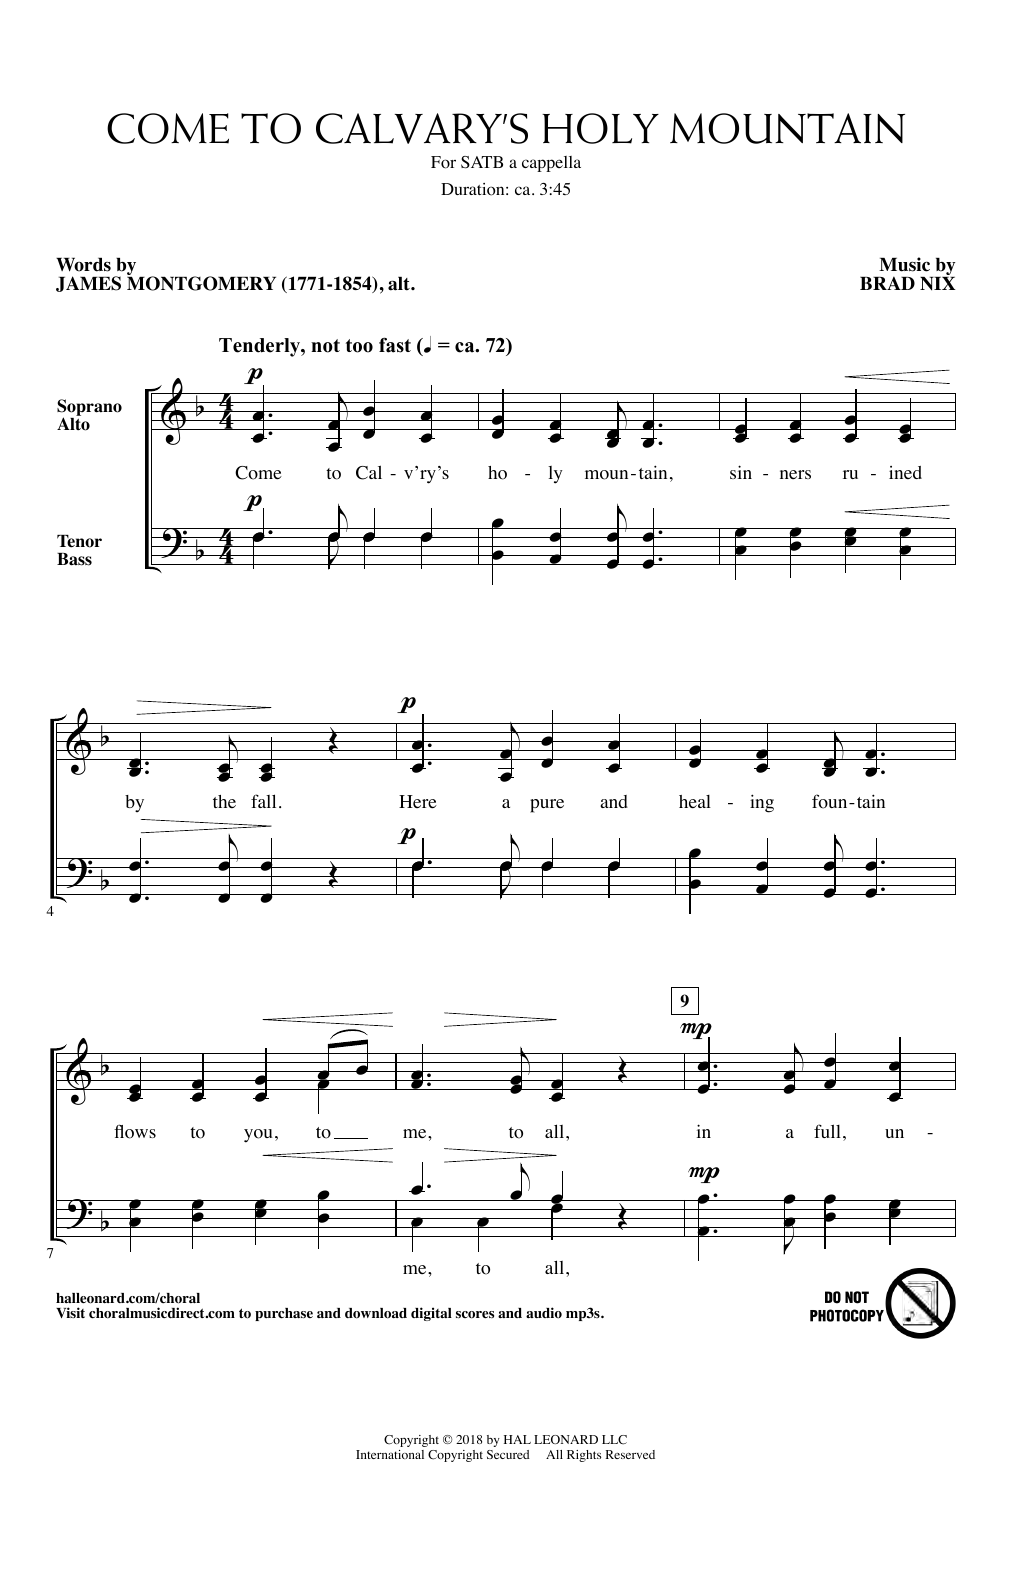 Download Brad Nix Come To Calvary's Holy Mountain Sheet Music